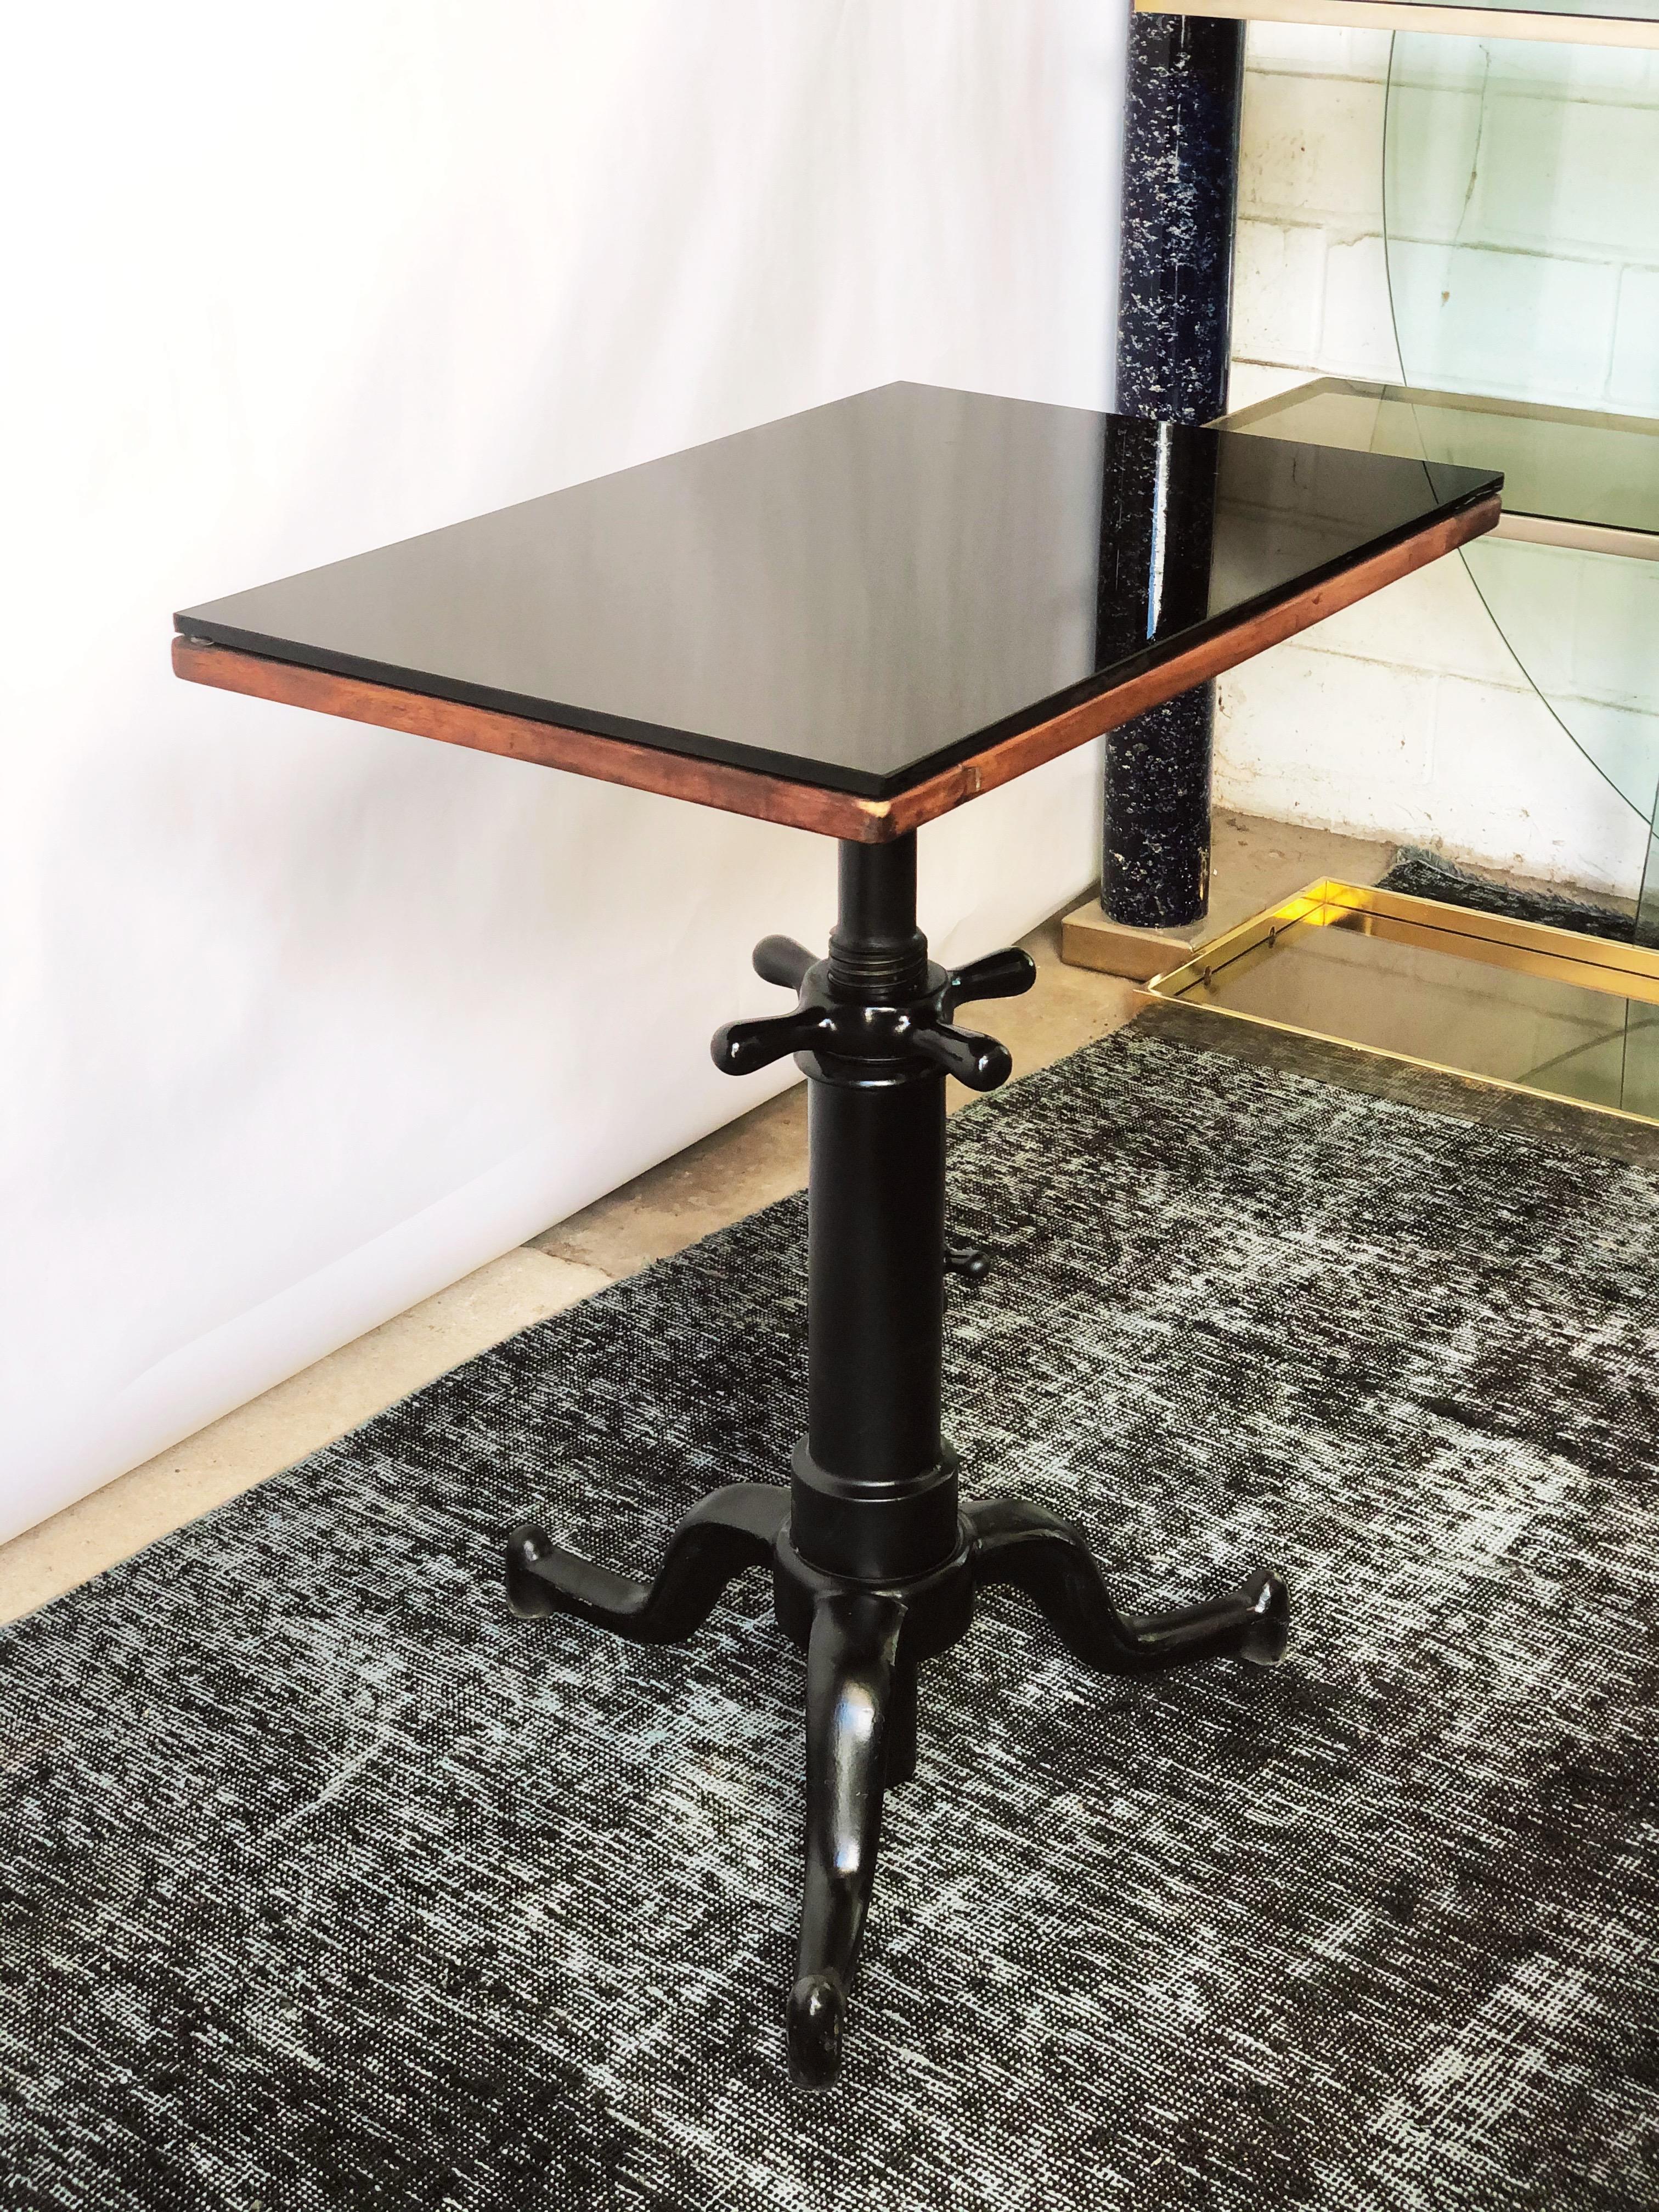 Vintage optometrist table. Heavy Industrial cast iron base that adjusts in height. Top swivels, or can be locked into place. Wooden top with thick black glass. Unknown maker.
Good condition,
circa 1940s. When adjusted height extends to 36.75